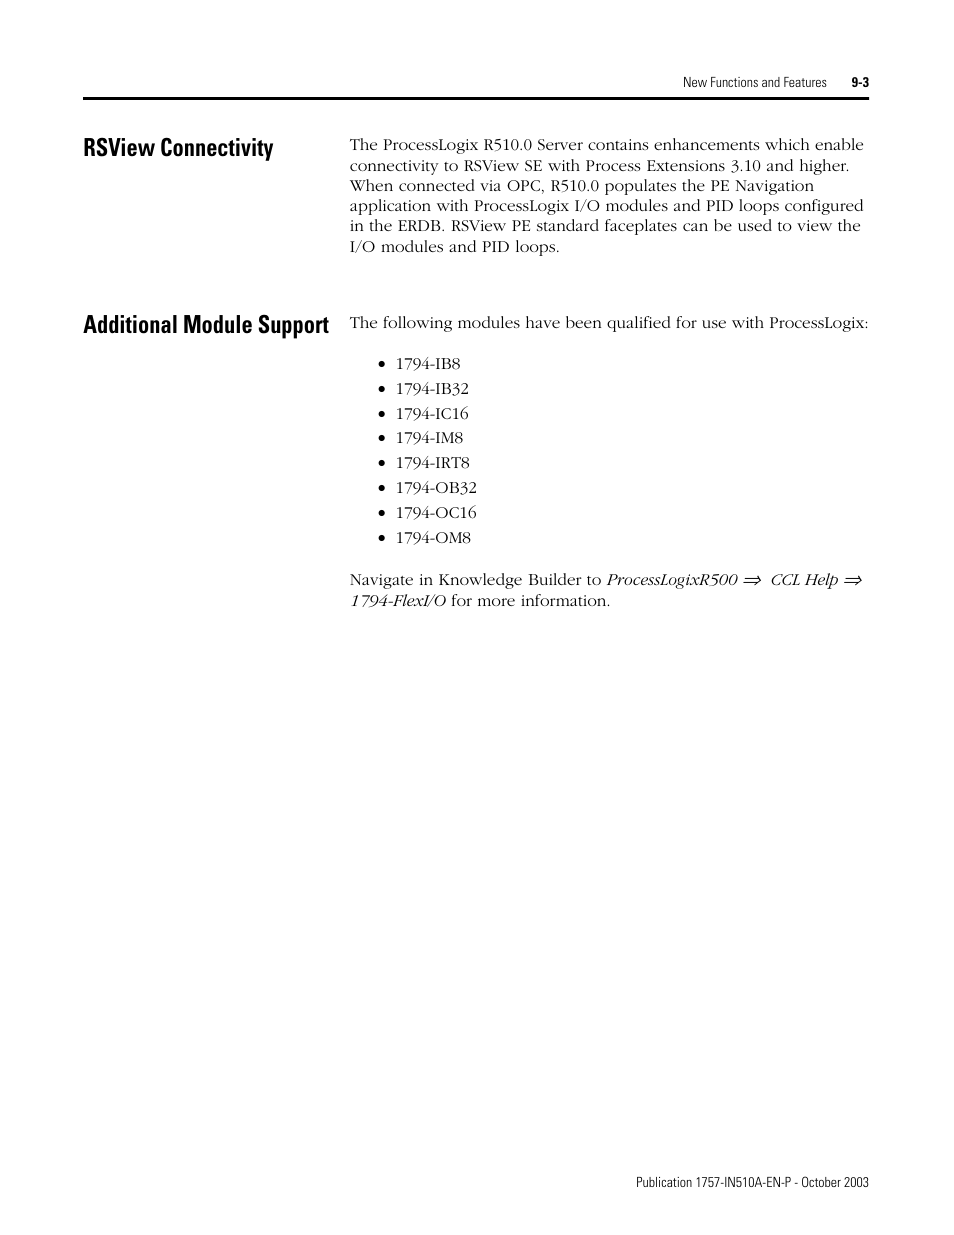 Rsview connectivity, Additional module support | Rockwell Automation 1757-SWKIT5100 ProcessLogix R510.0 Installation and Upgrade Guide User Manual | Page 233 / 271